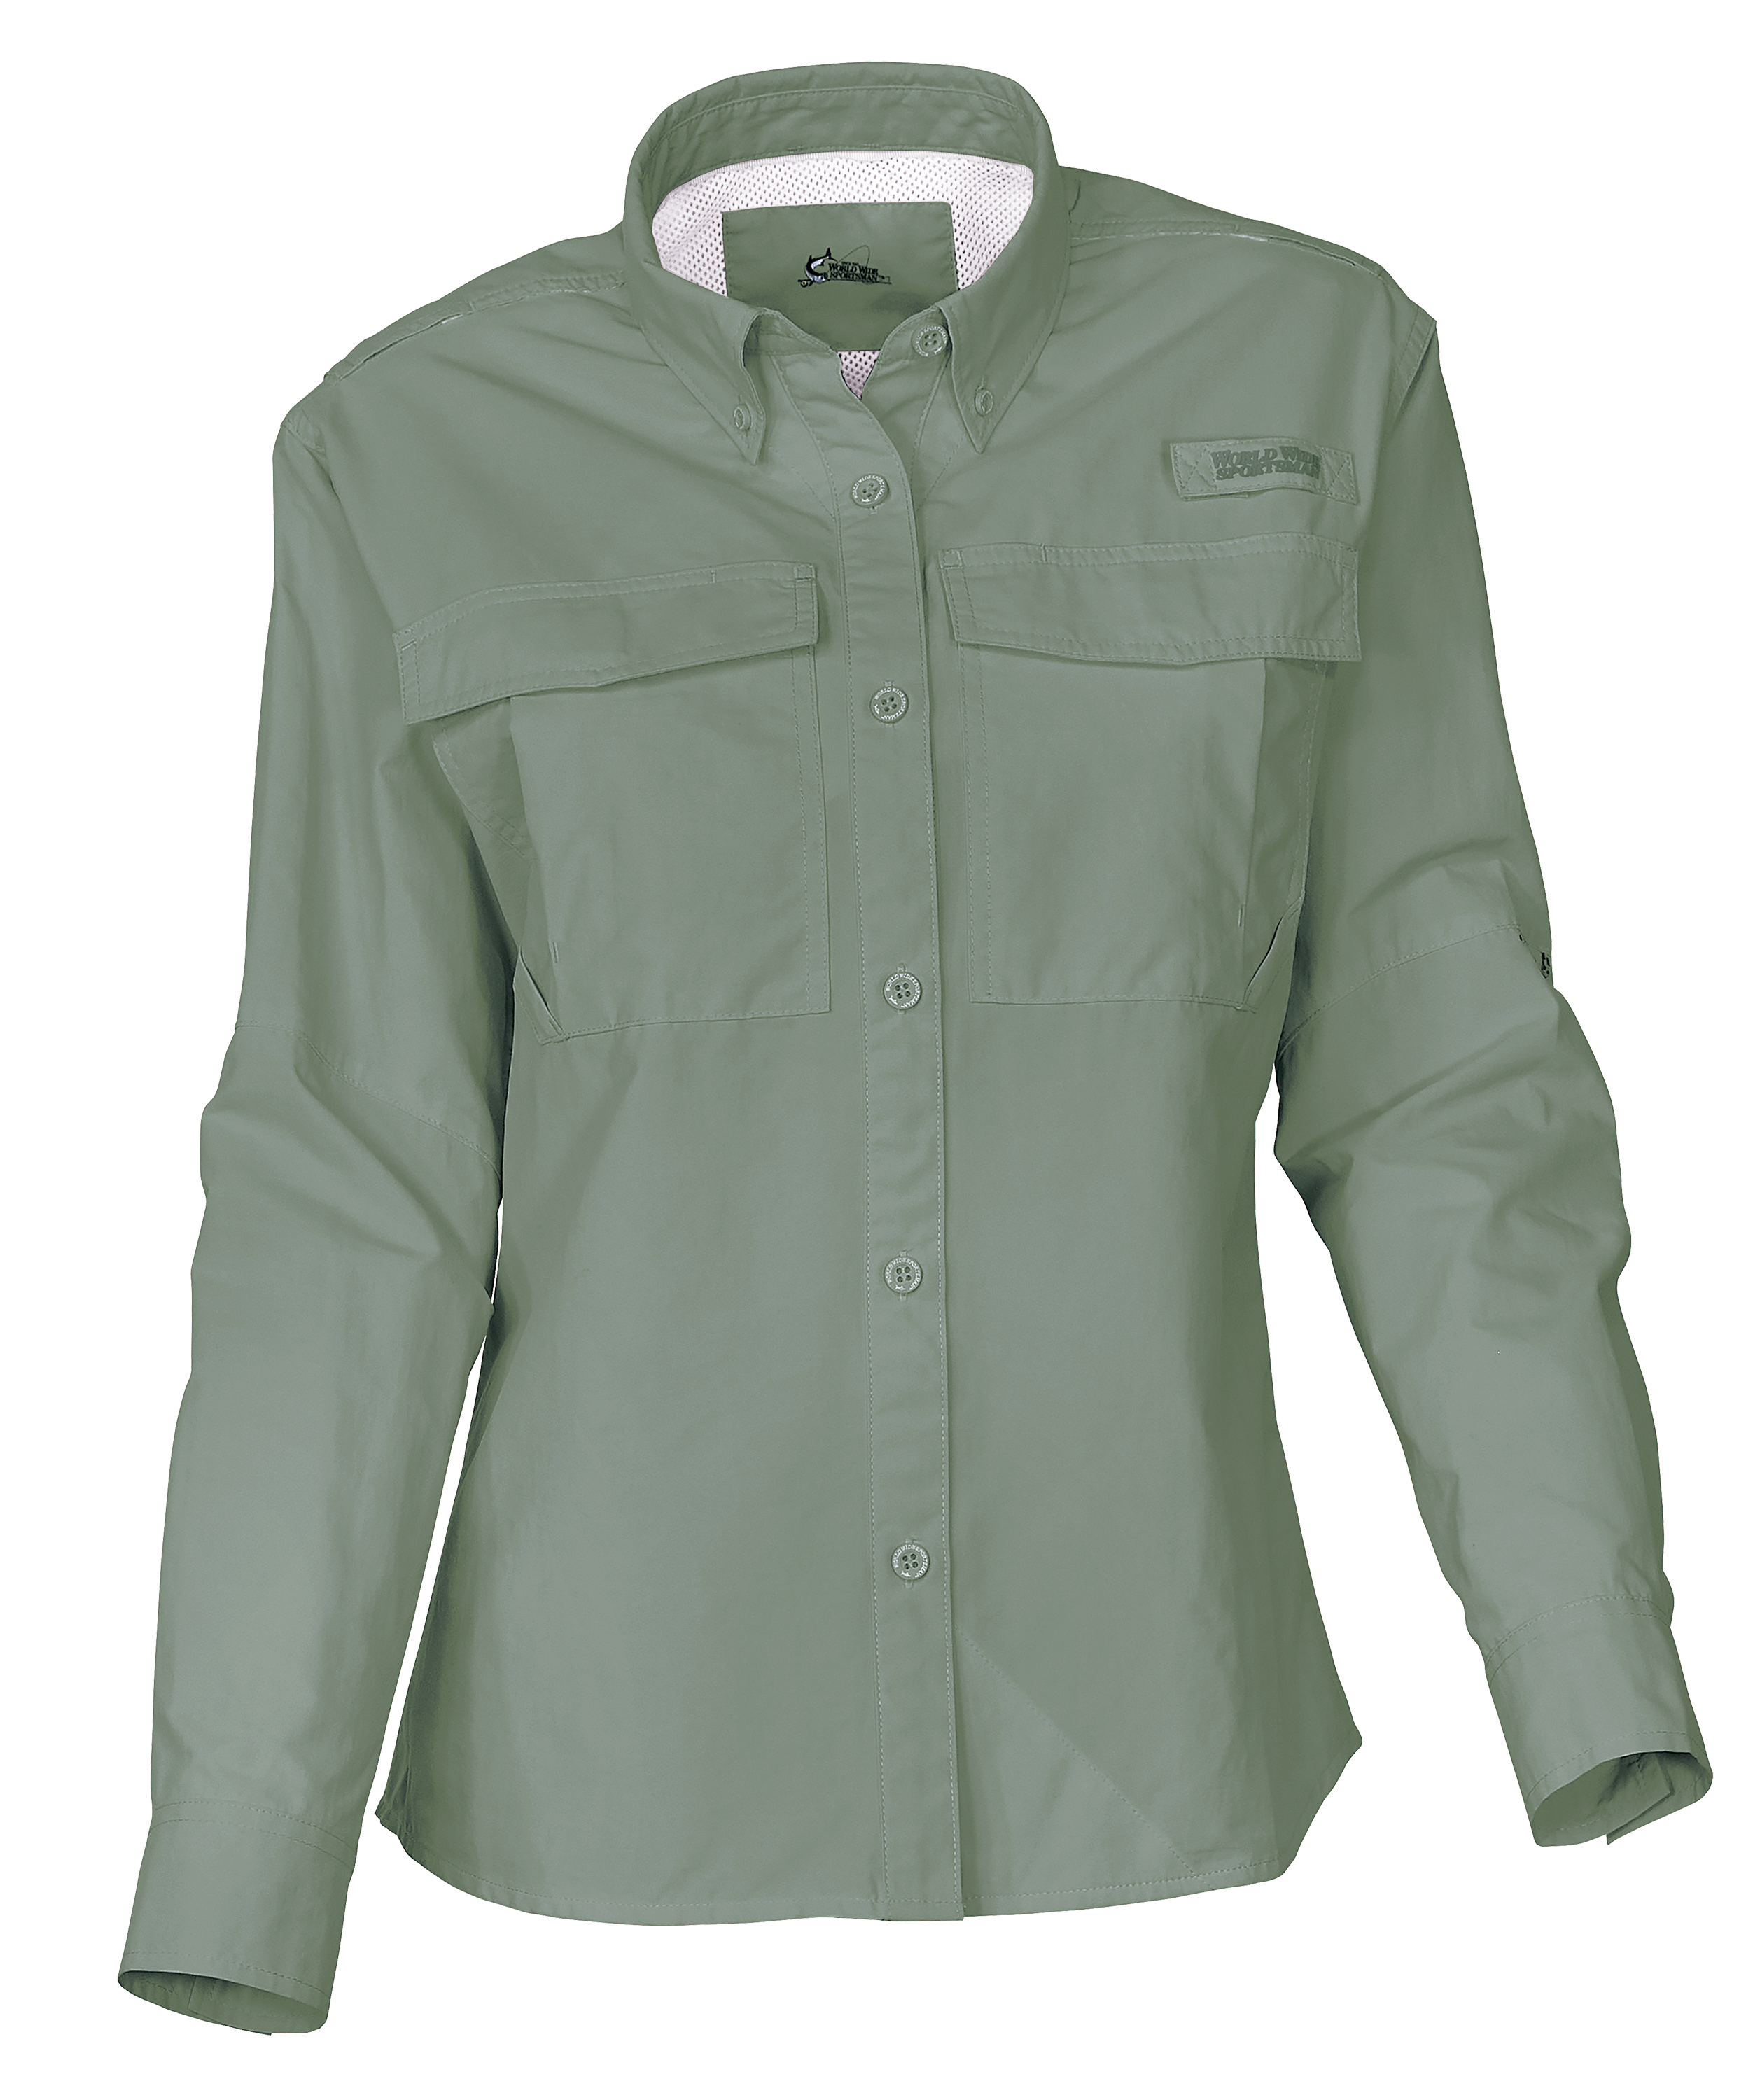 World Wide Sportsman Nylon Angler Long-Sleeve Shirt for Ladies - Candlelight Peach - 2XL